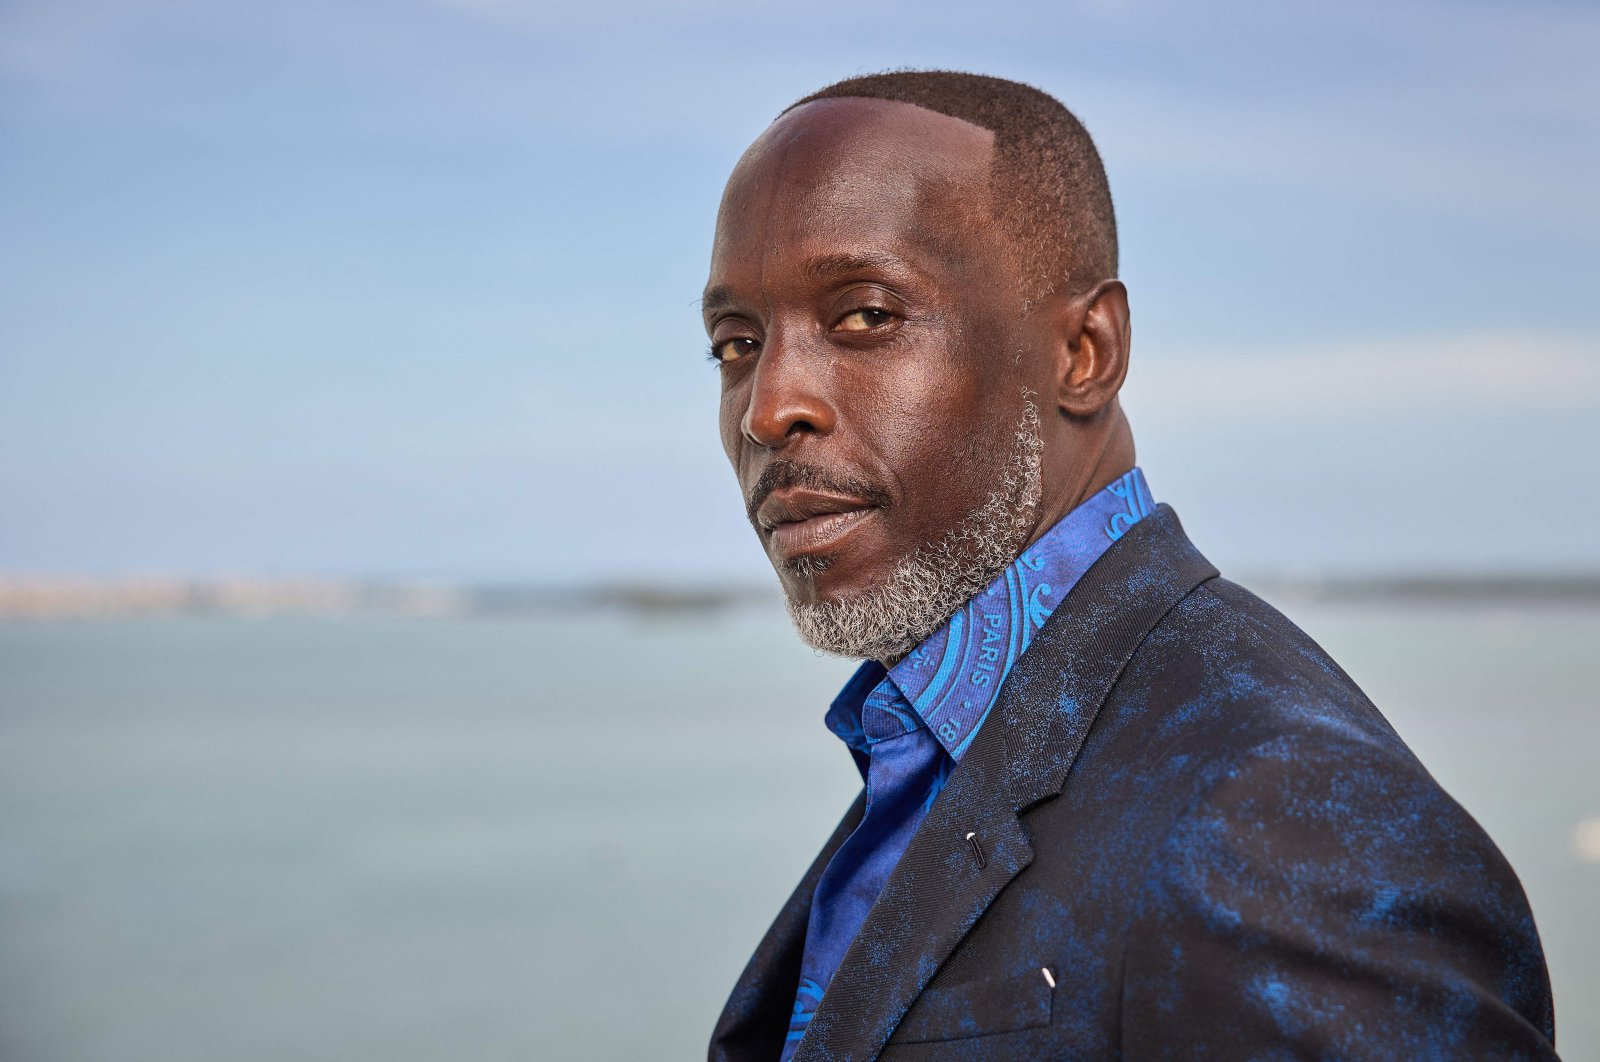 Michael K. Williams poses for a photo in his award show look for the 27th Annual Screen Actors Guild Awards in Miami, Florida, U.S., March 31, 2021. (AFP Photo)